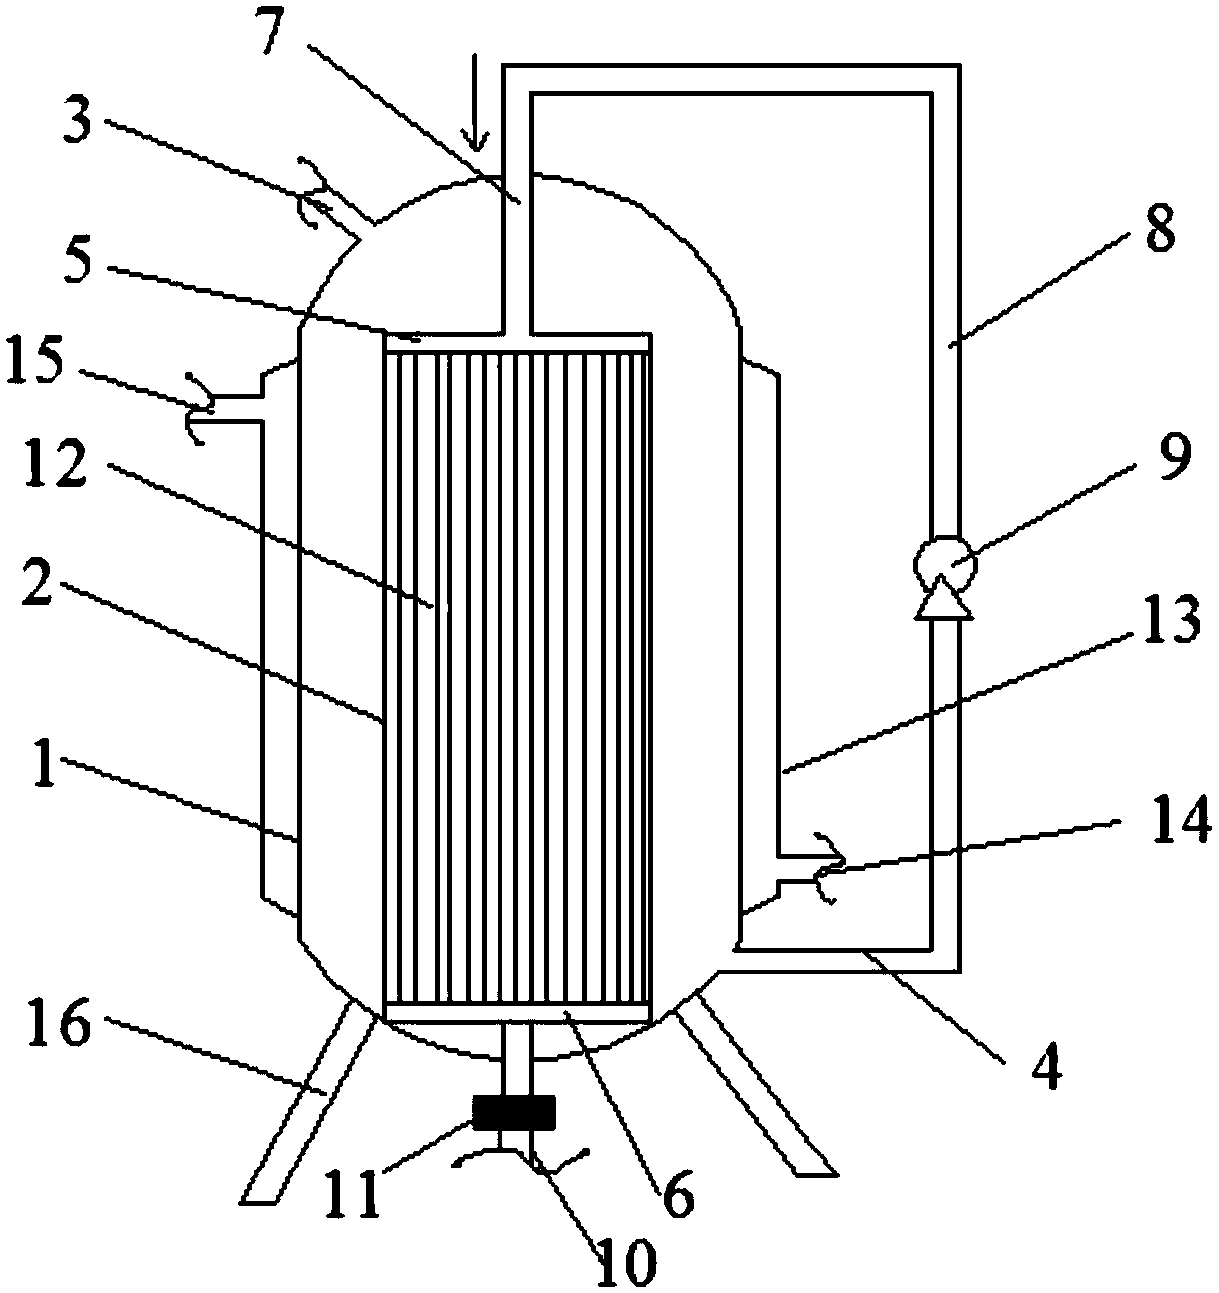 Crystallization apparatus and purification method for refining and purifying ethylene carbonate